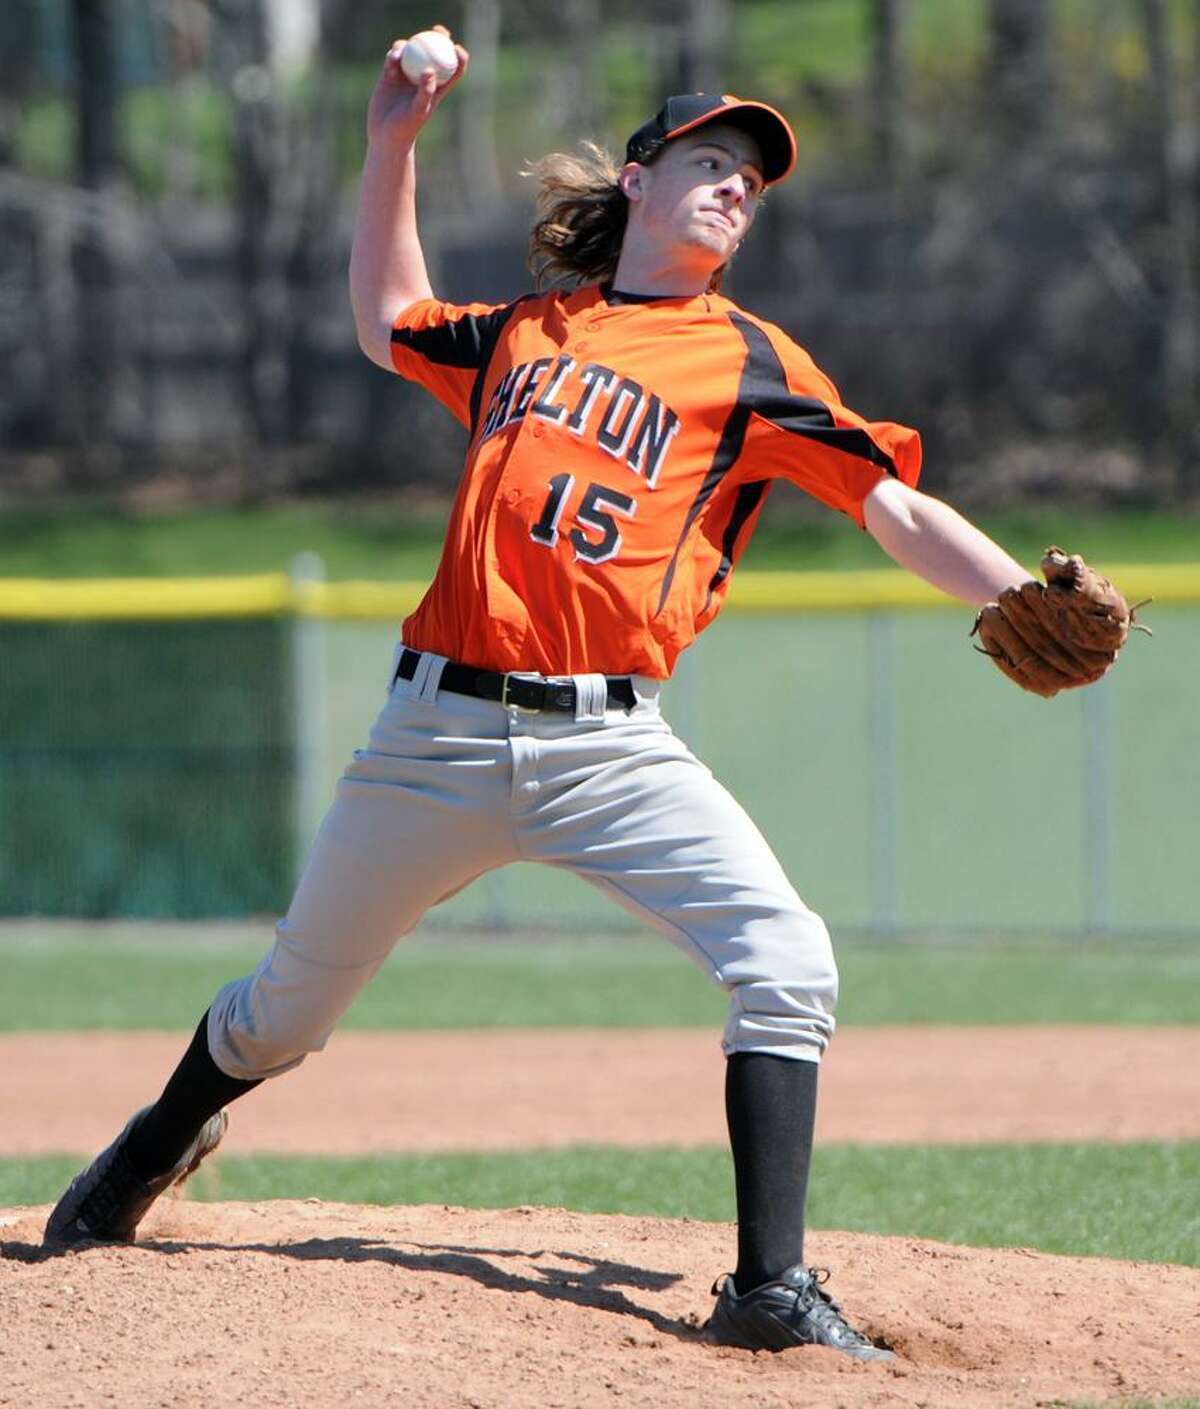 Shelton HS baseball pitcher Jeremy Soderholm pitches during the 4th inning against Foran High School in Milford Saturday 4/7/12. Photo by Peter Hvizdak/ New Haven Register